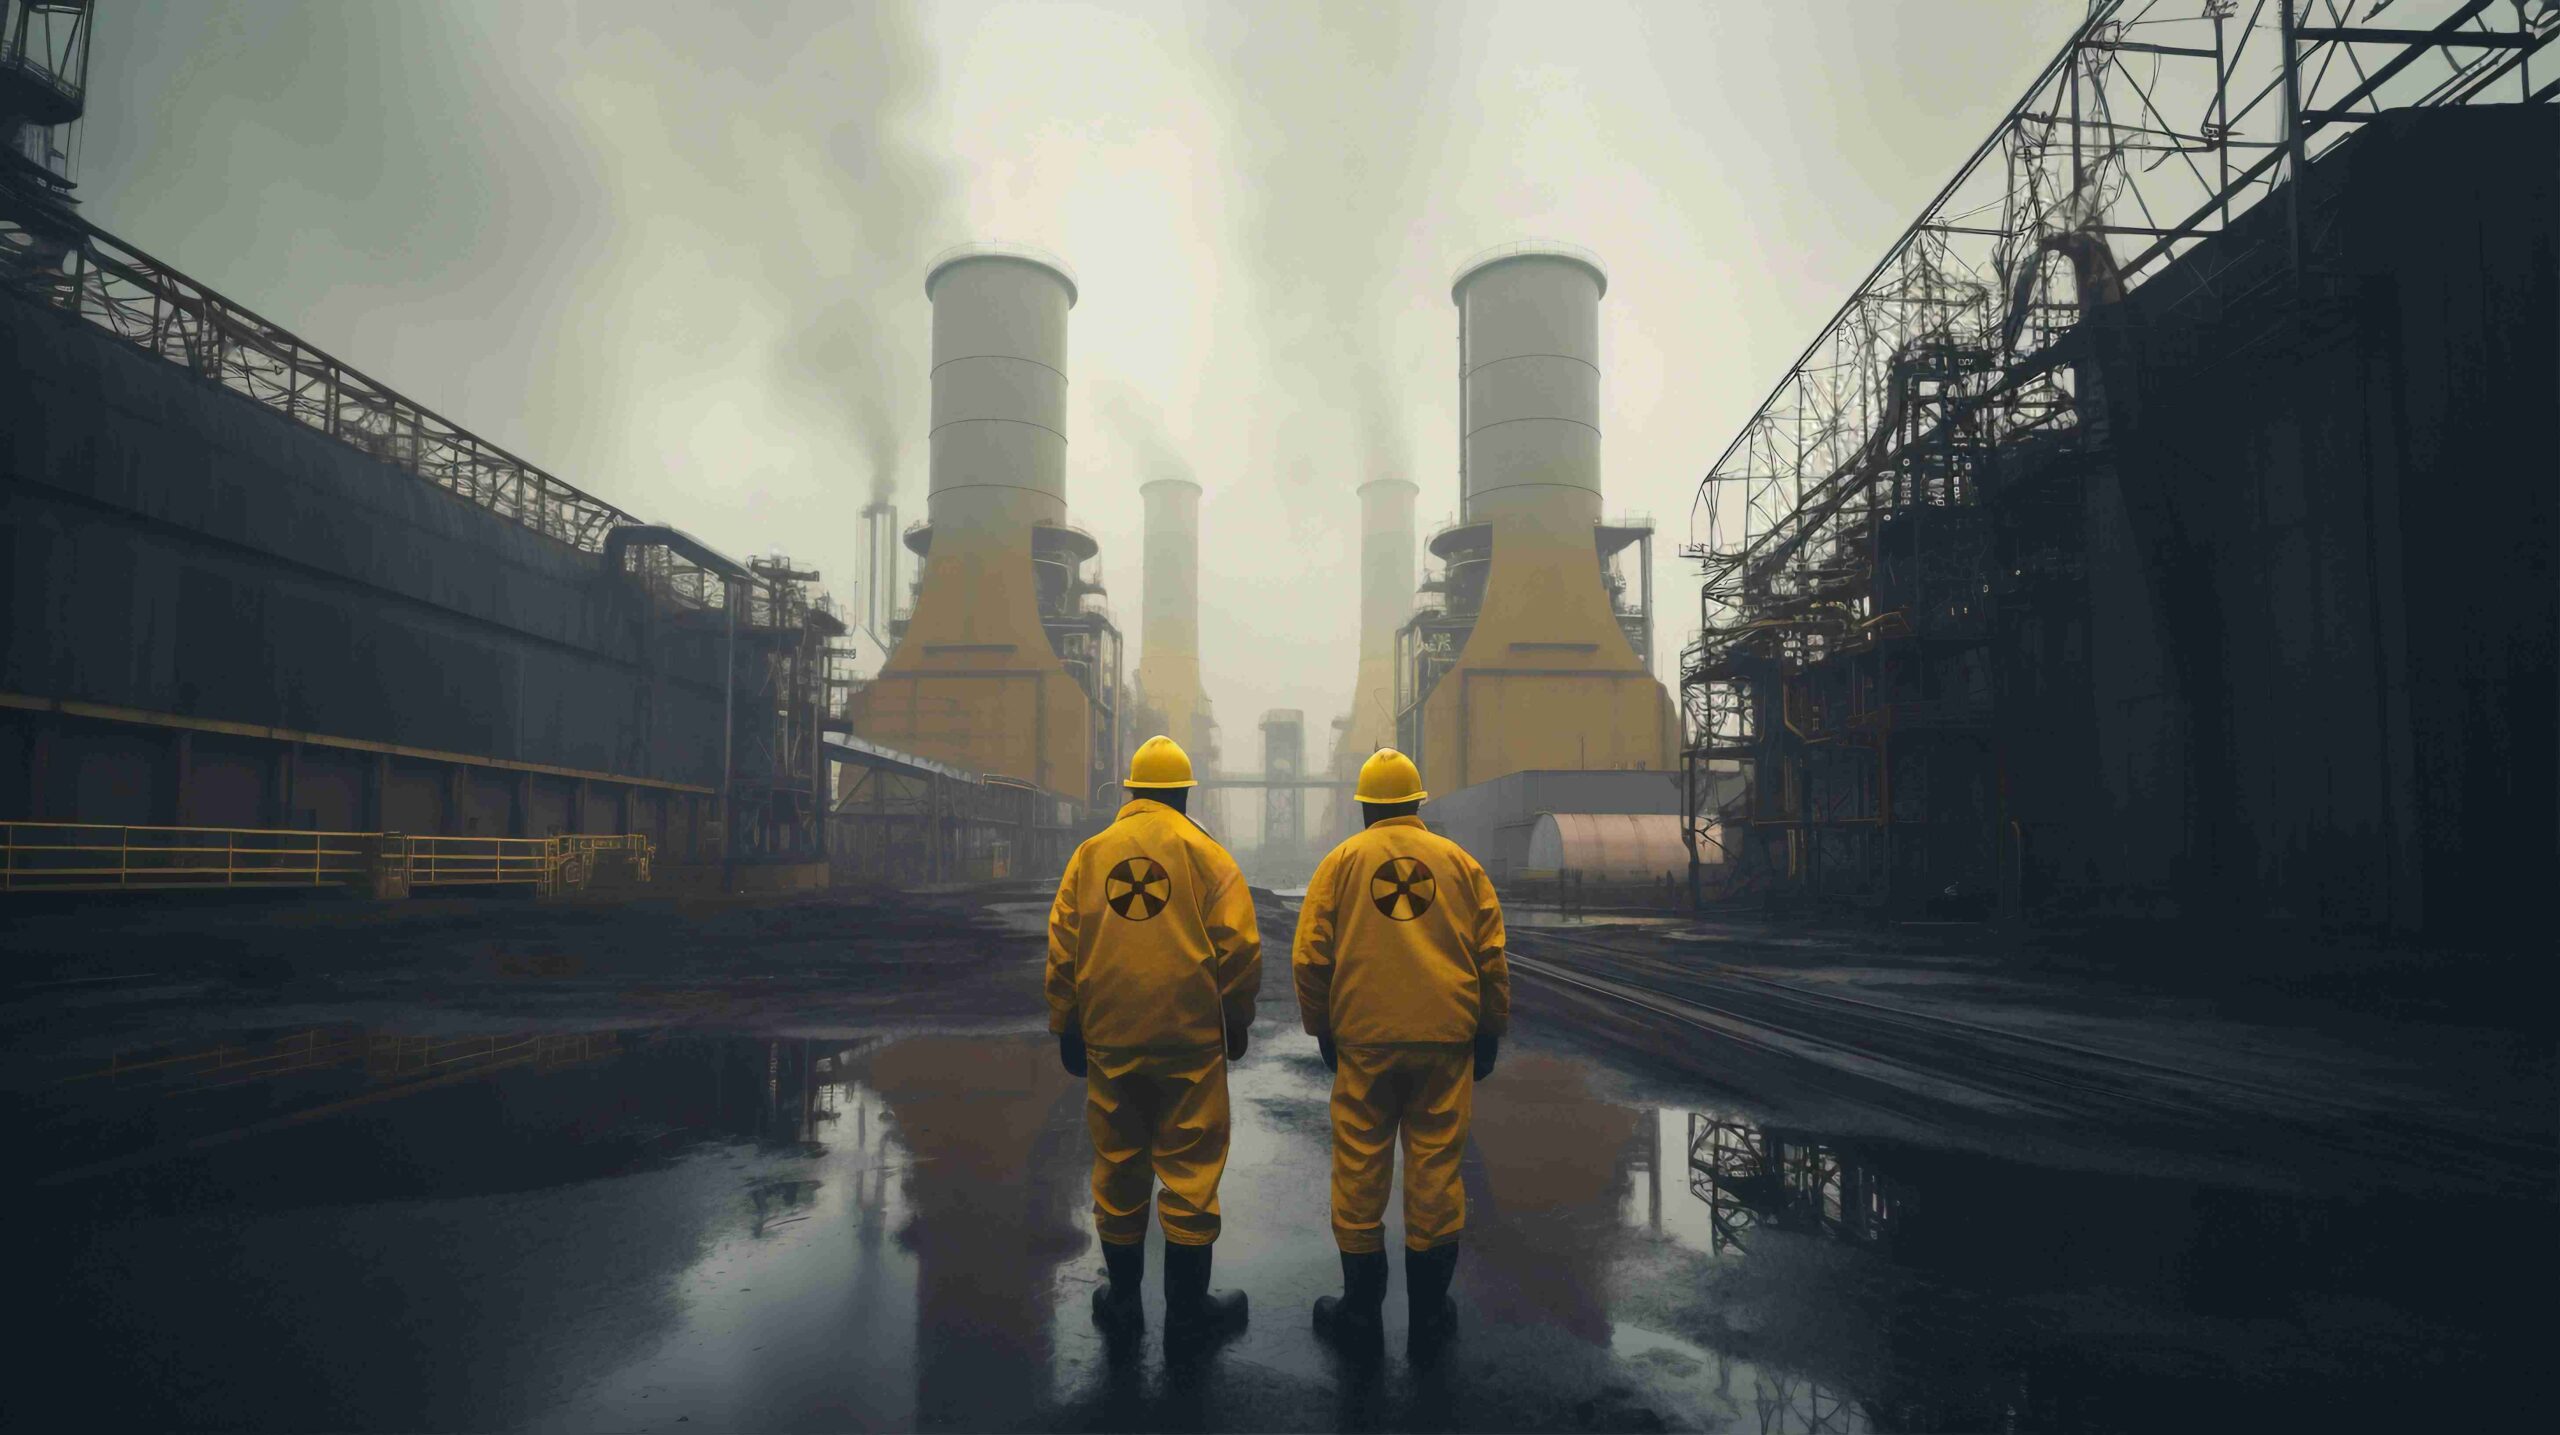 Chemical factory following safety norms